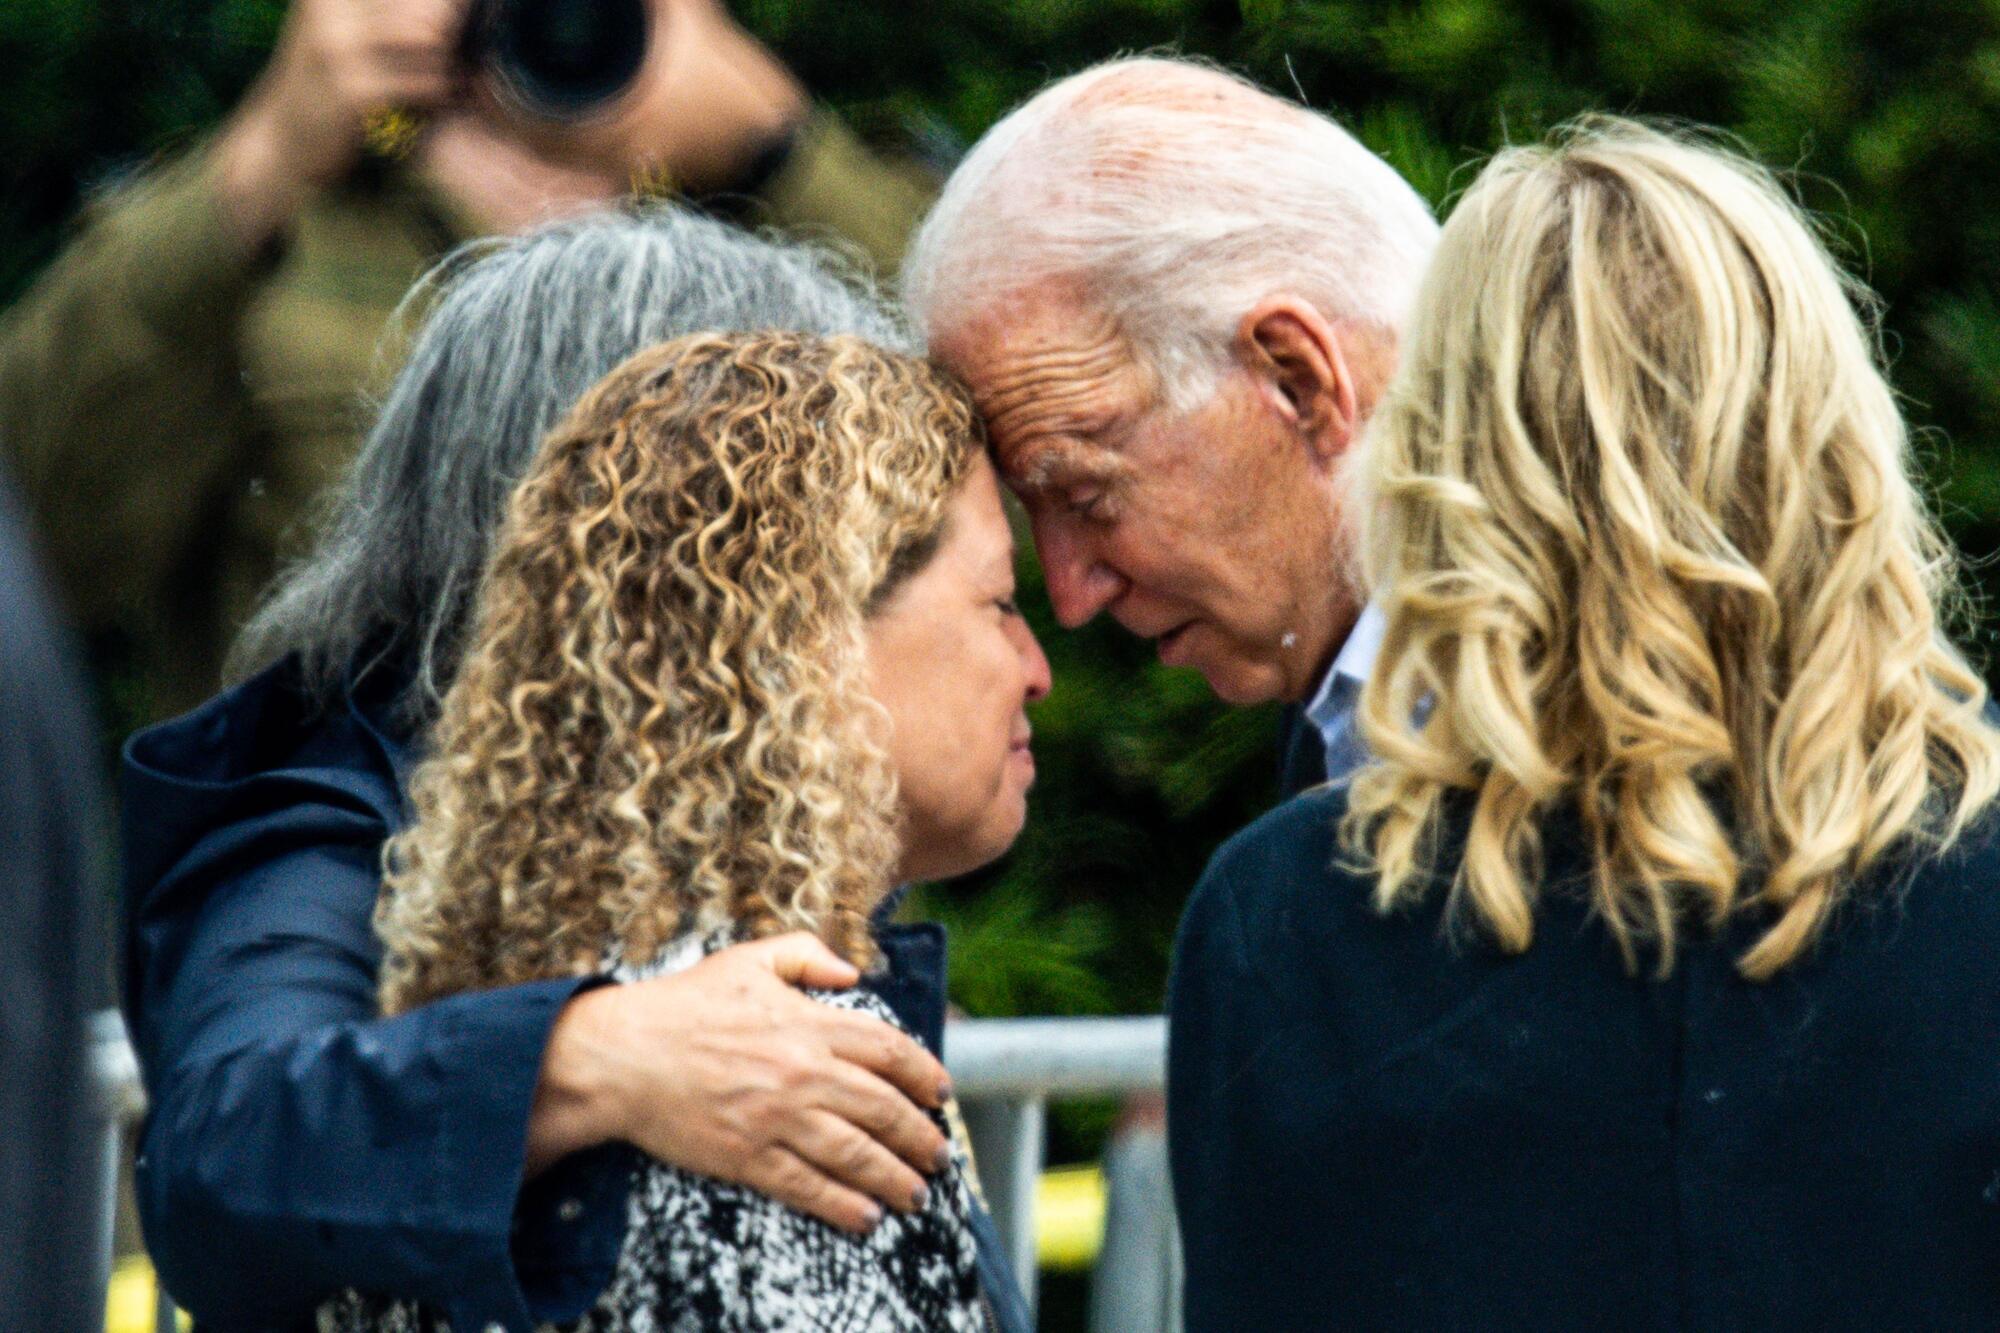 Biden leans his forehead against the forehead of an emotional woman.